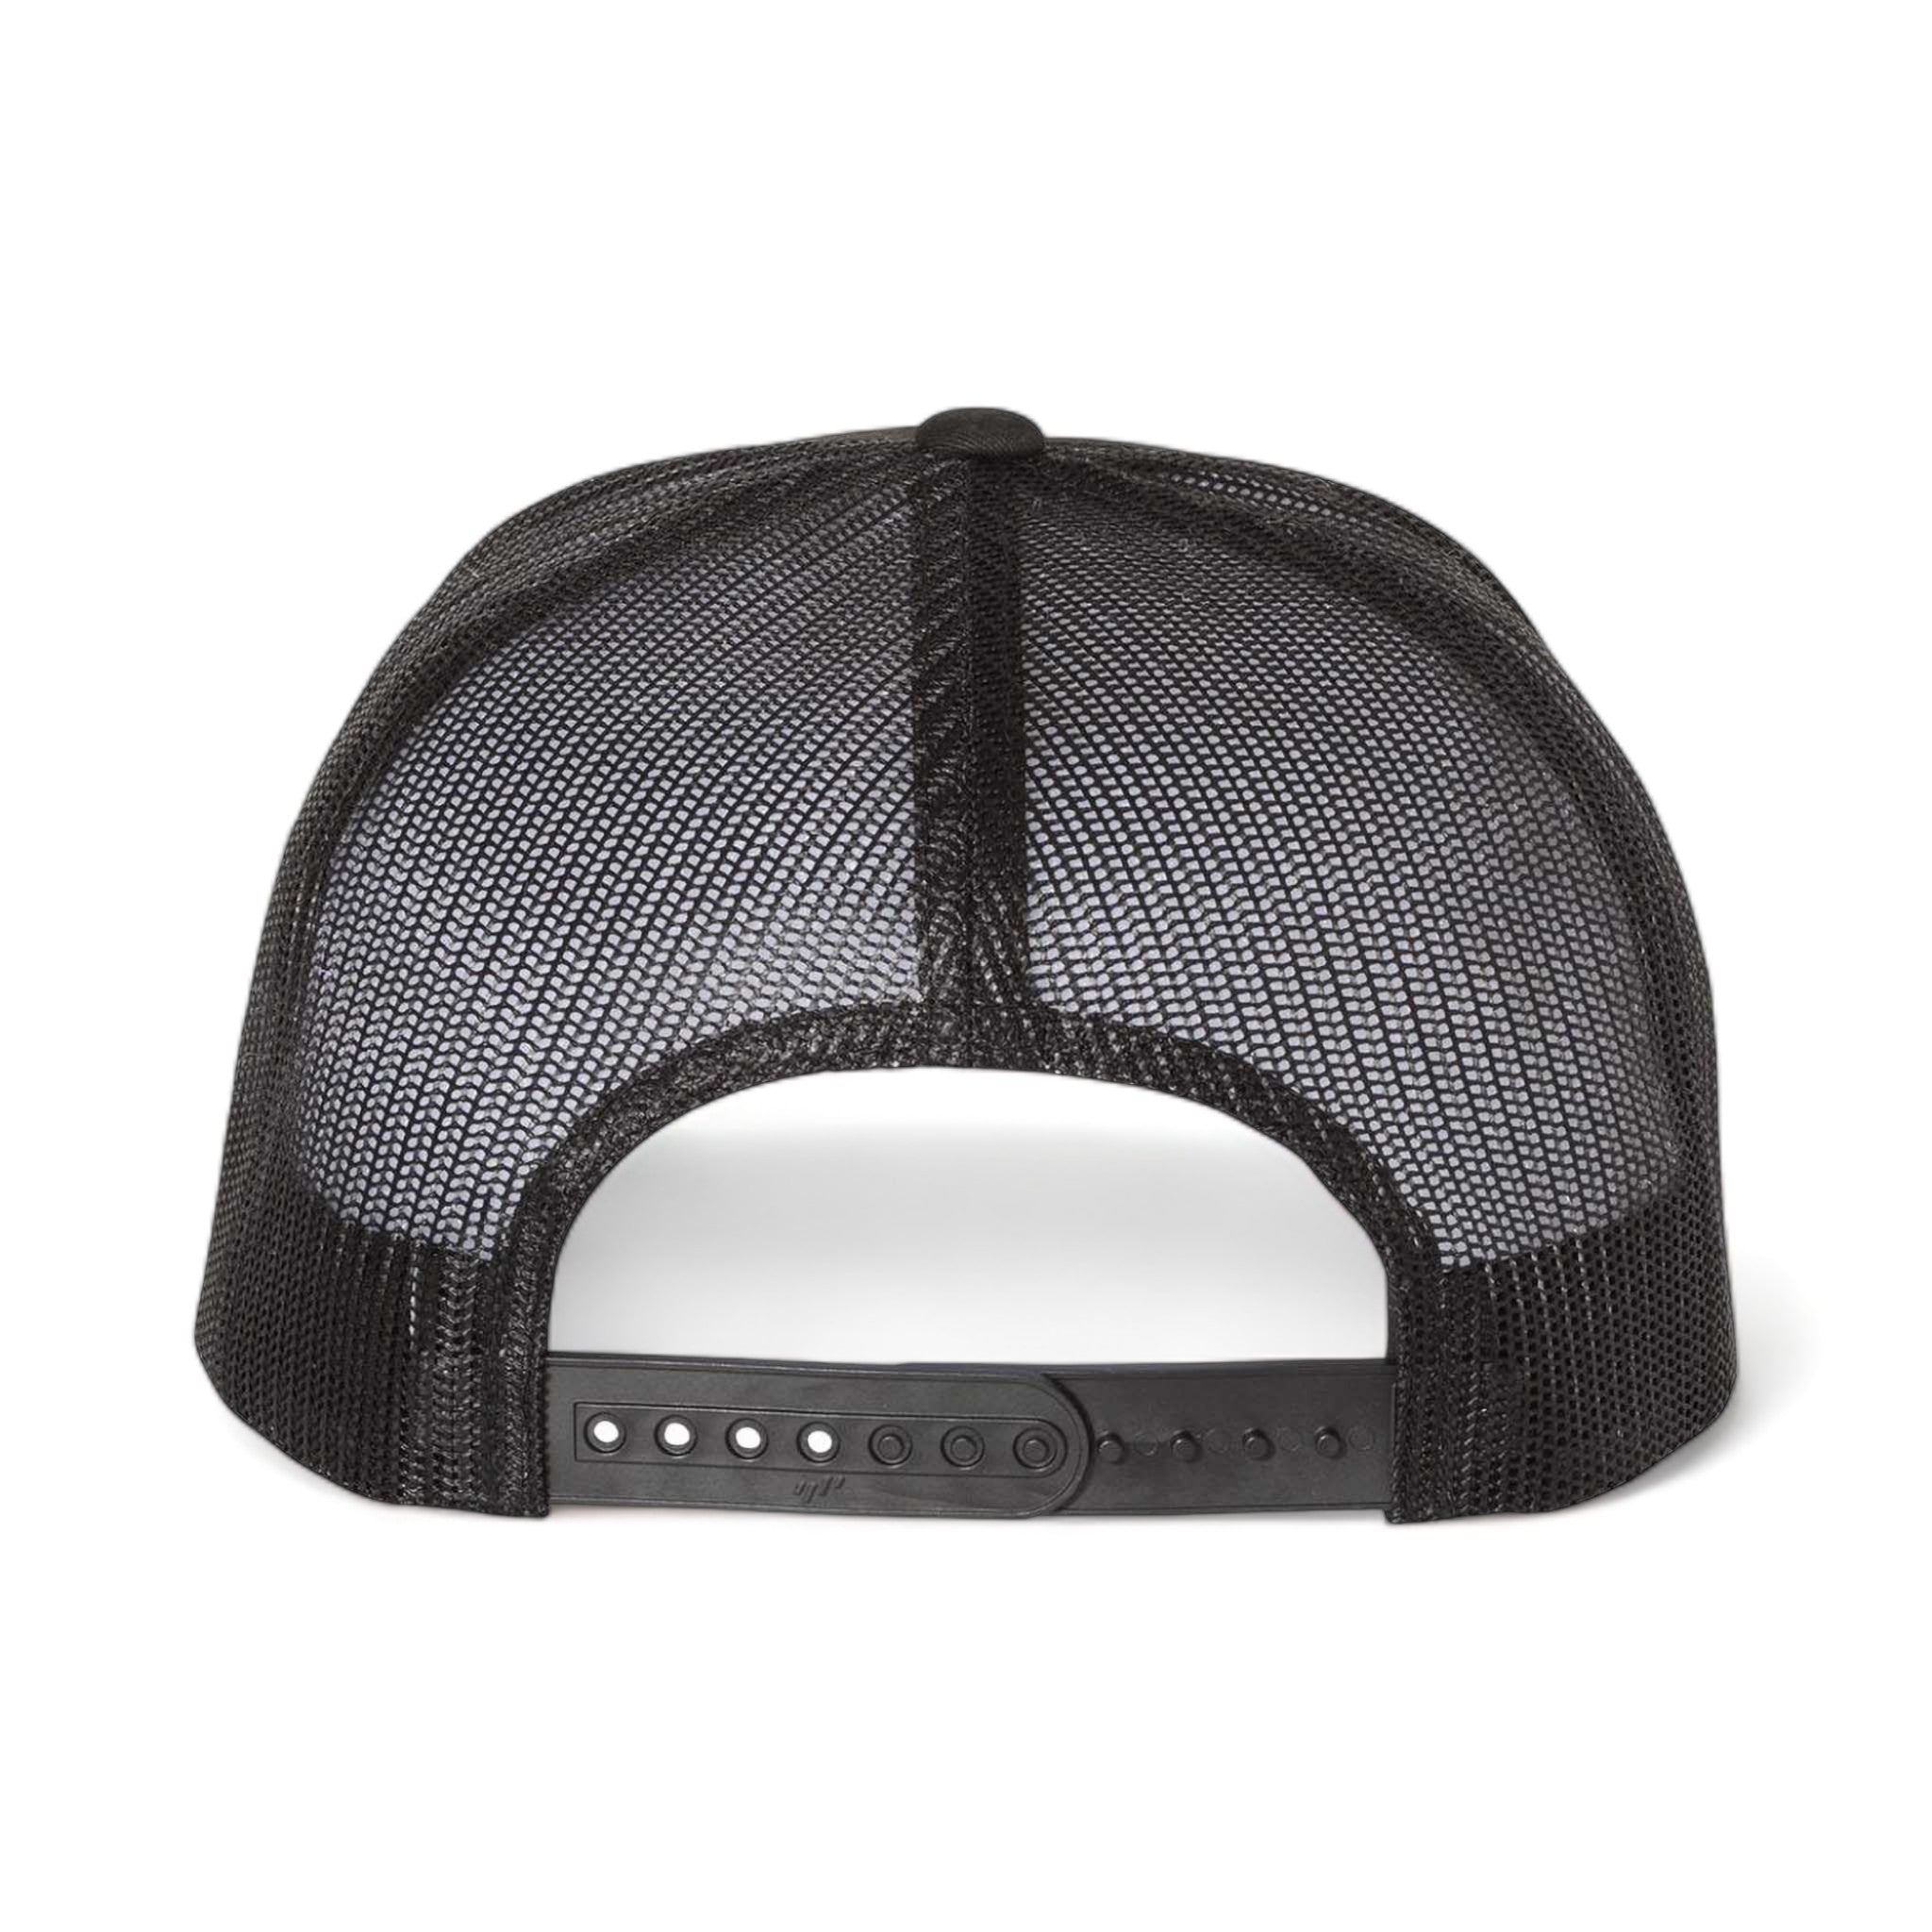 Back view of YP Classics 6006 custom hat in multicam black and black